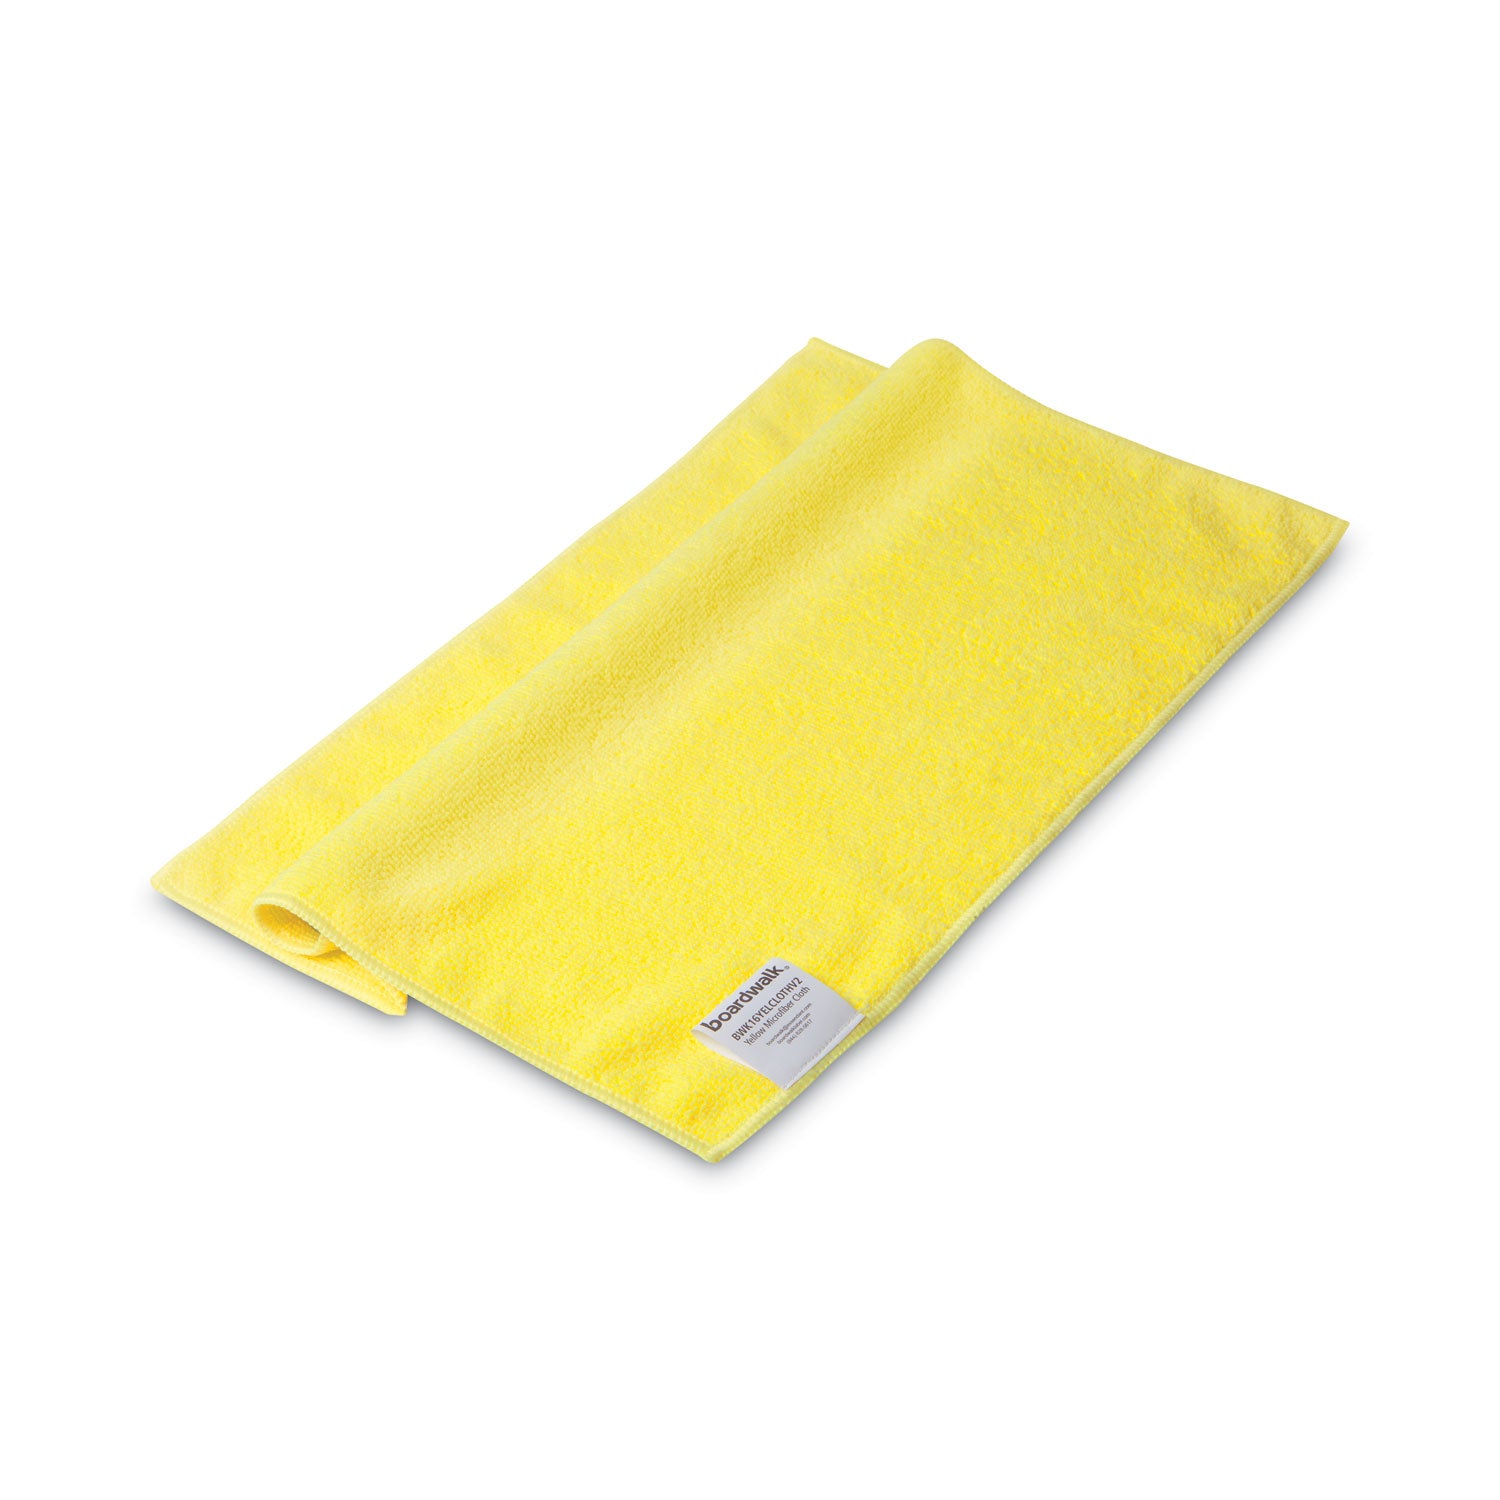 microfiber-cleaning-cloths-16-x-16-yellow-24-pack_bwk16yelclothv2 - 2